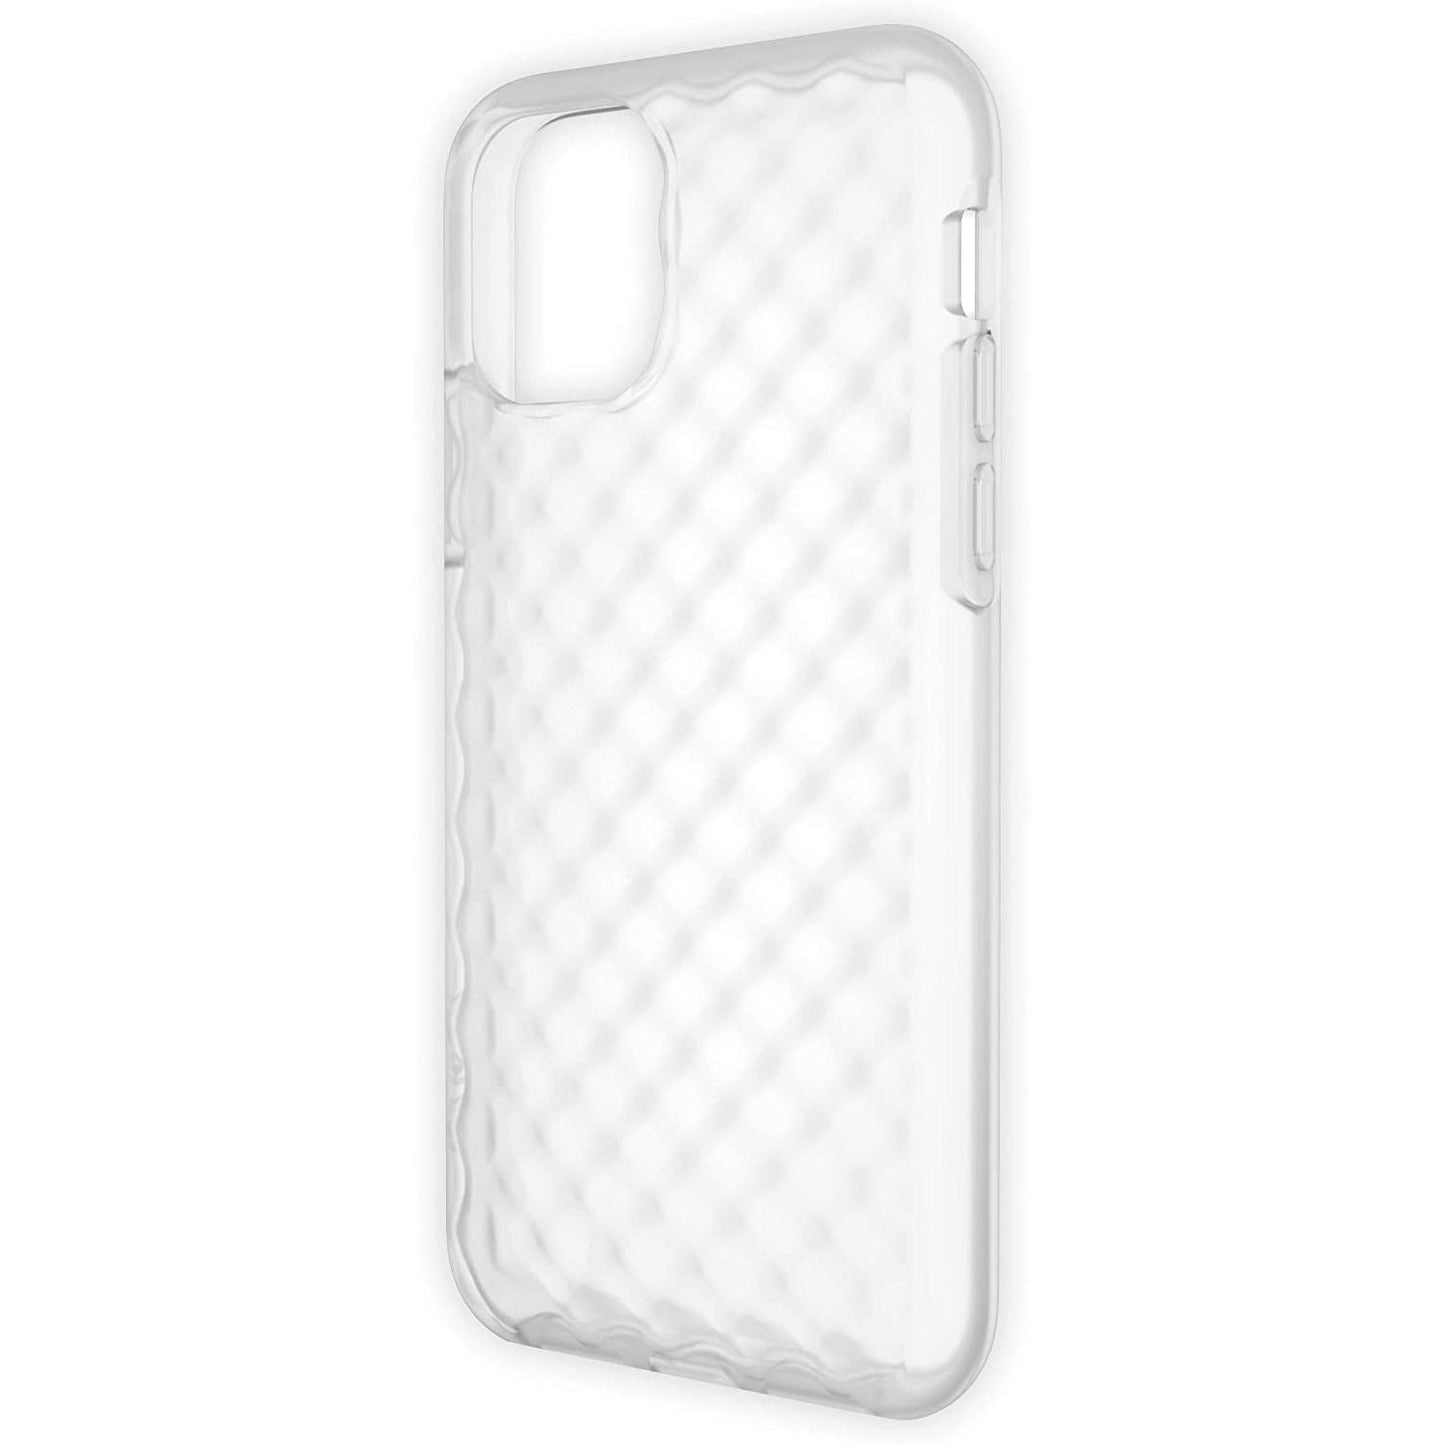 iPhone 11 Pro Max + XS Max Waffle Cover (Two Colors)